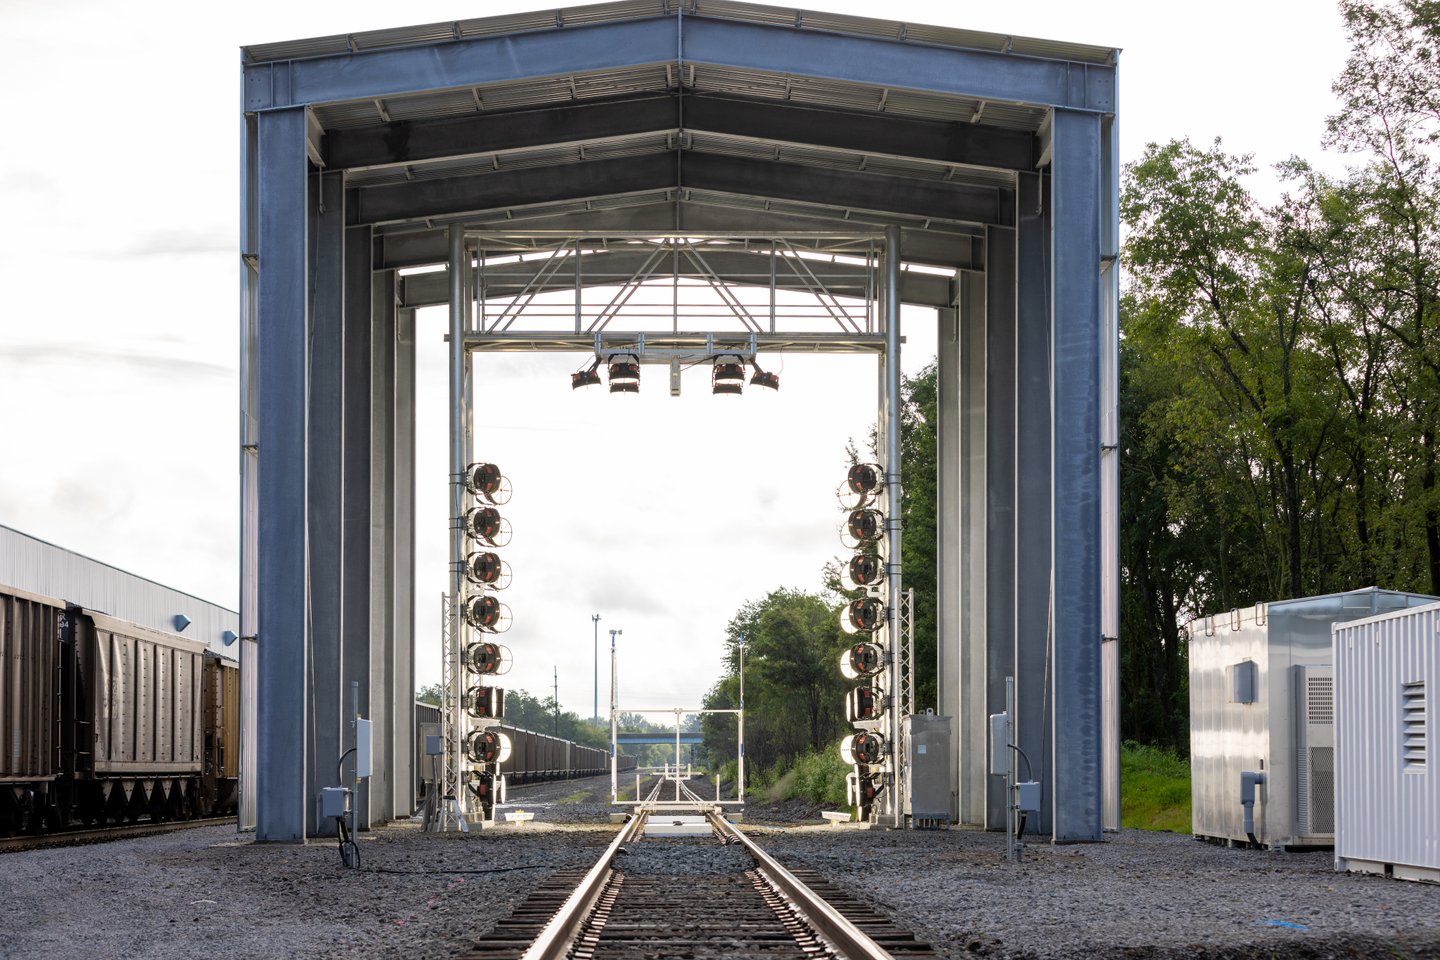 Norfolk Southern is deploying digital train inspection portals to enhance rail safety across its network.